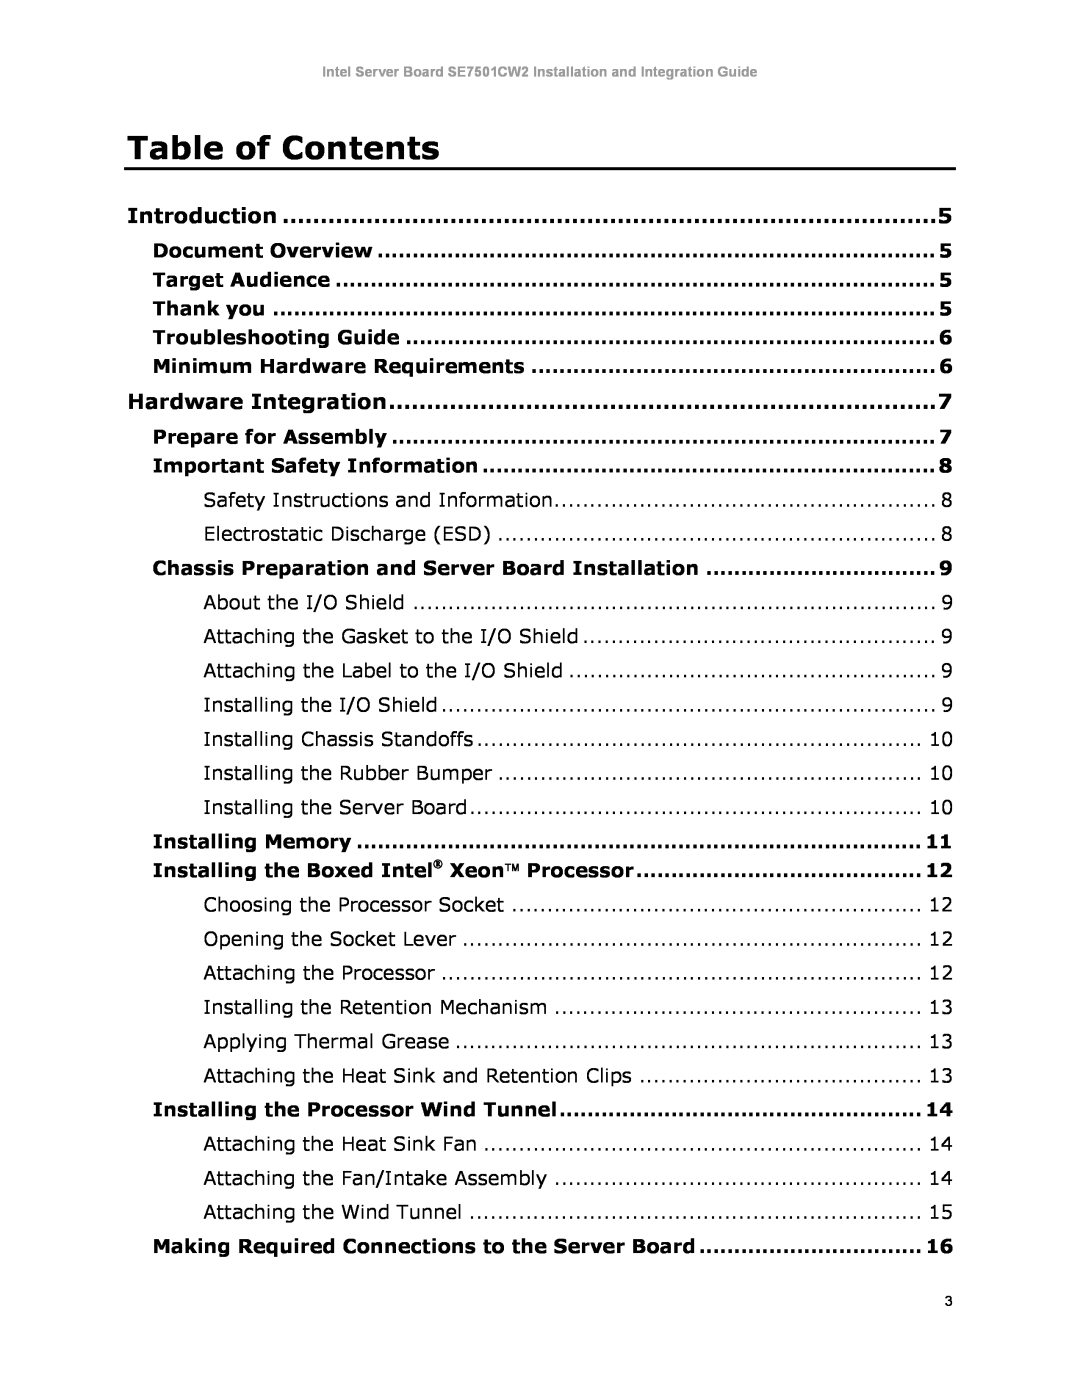 Intel SE7501CW2 manual Table of Contents 